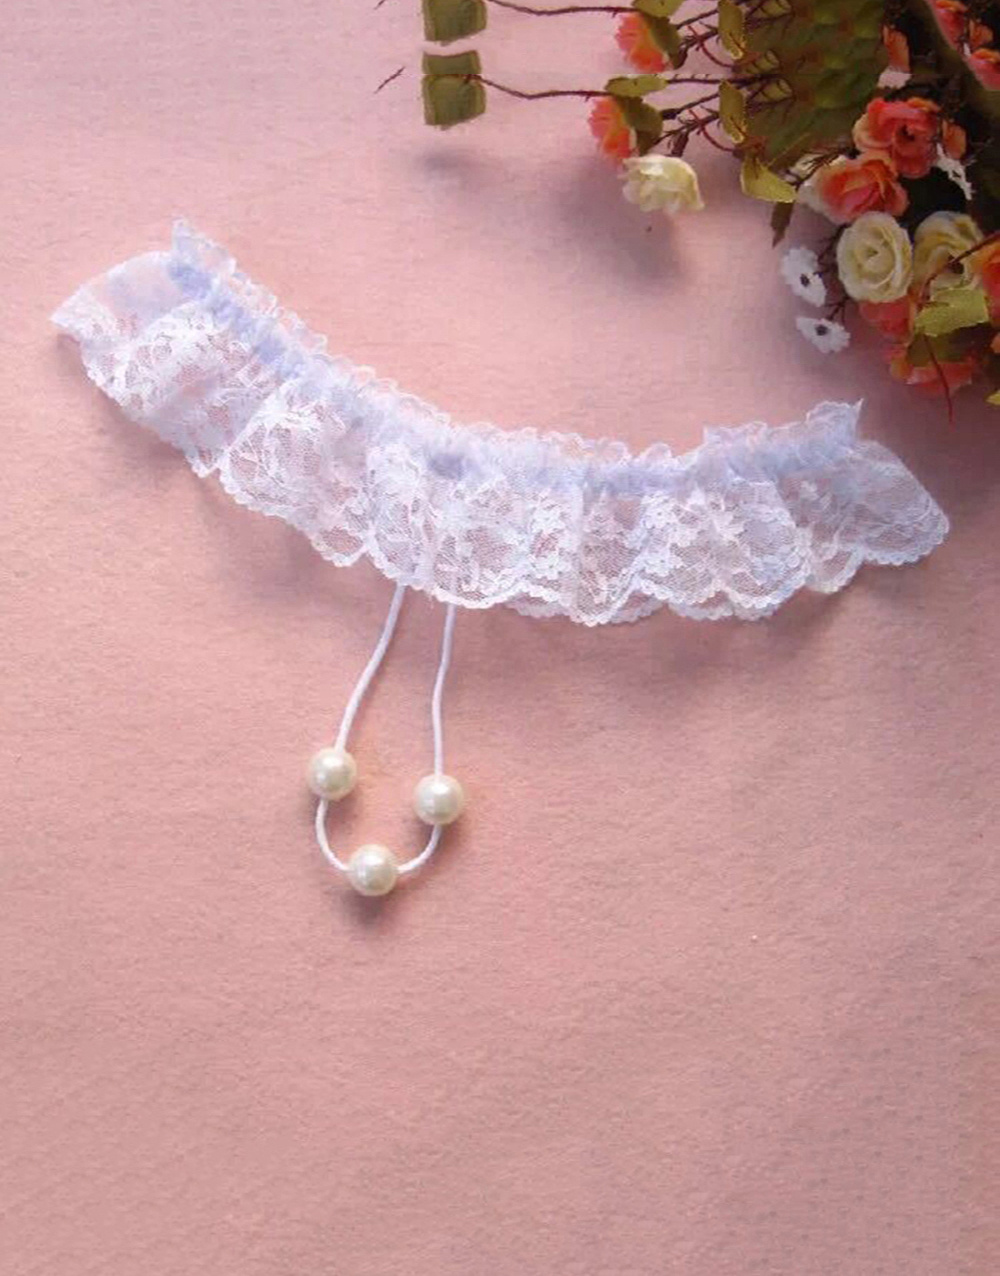 Women Sexy Panties G-string Hollow Underwear Thongs Female Lingerie Pearl  Lace Panty 